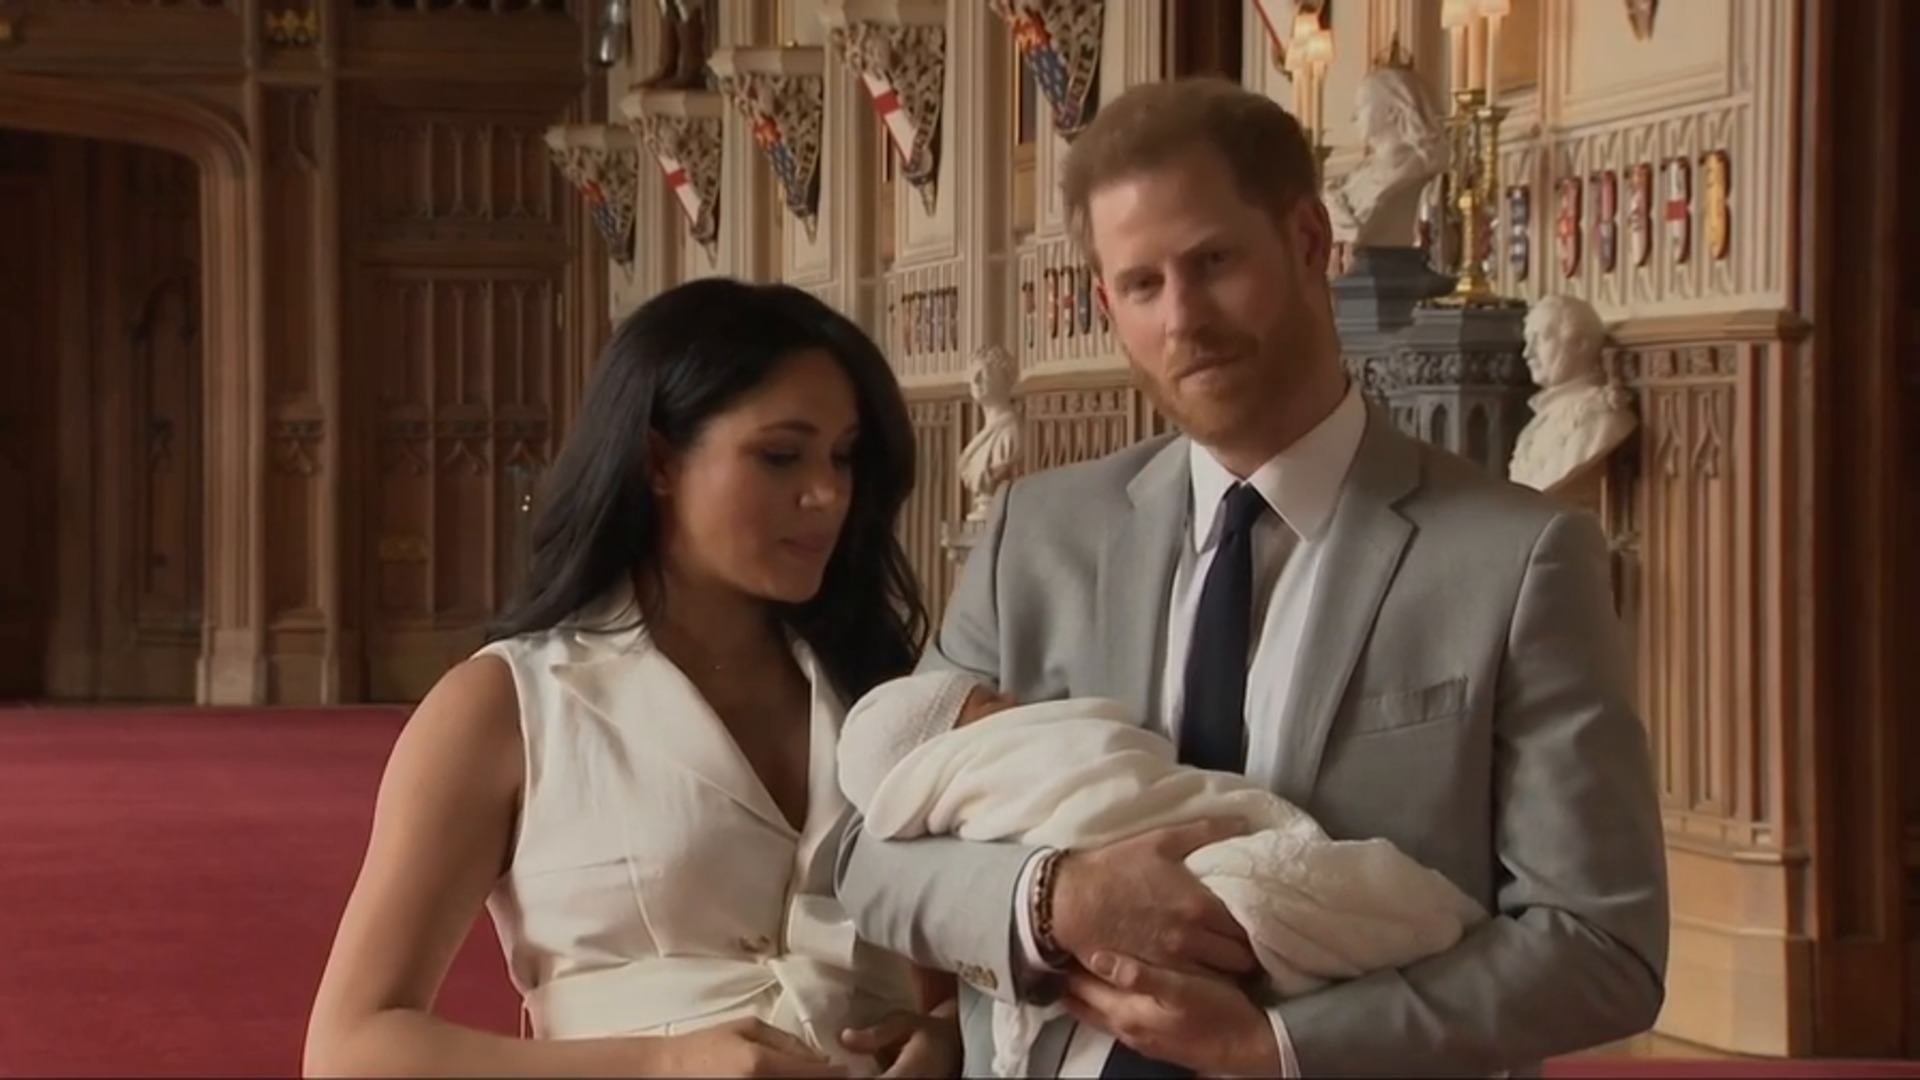 Harry and Meghan introduce their son to the world